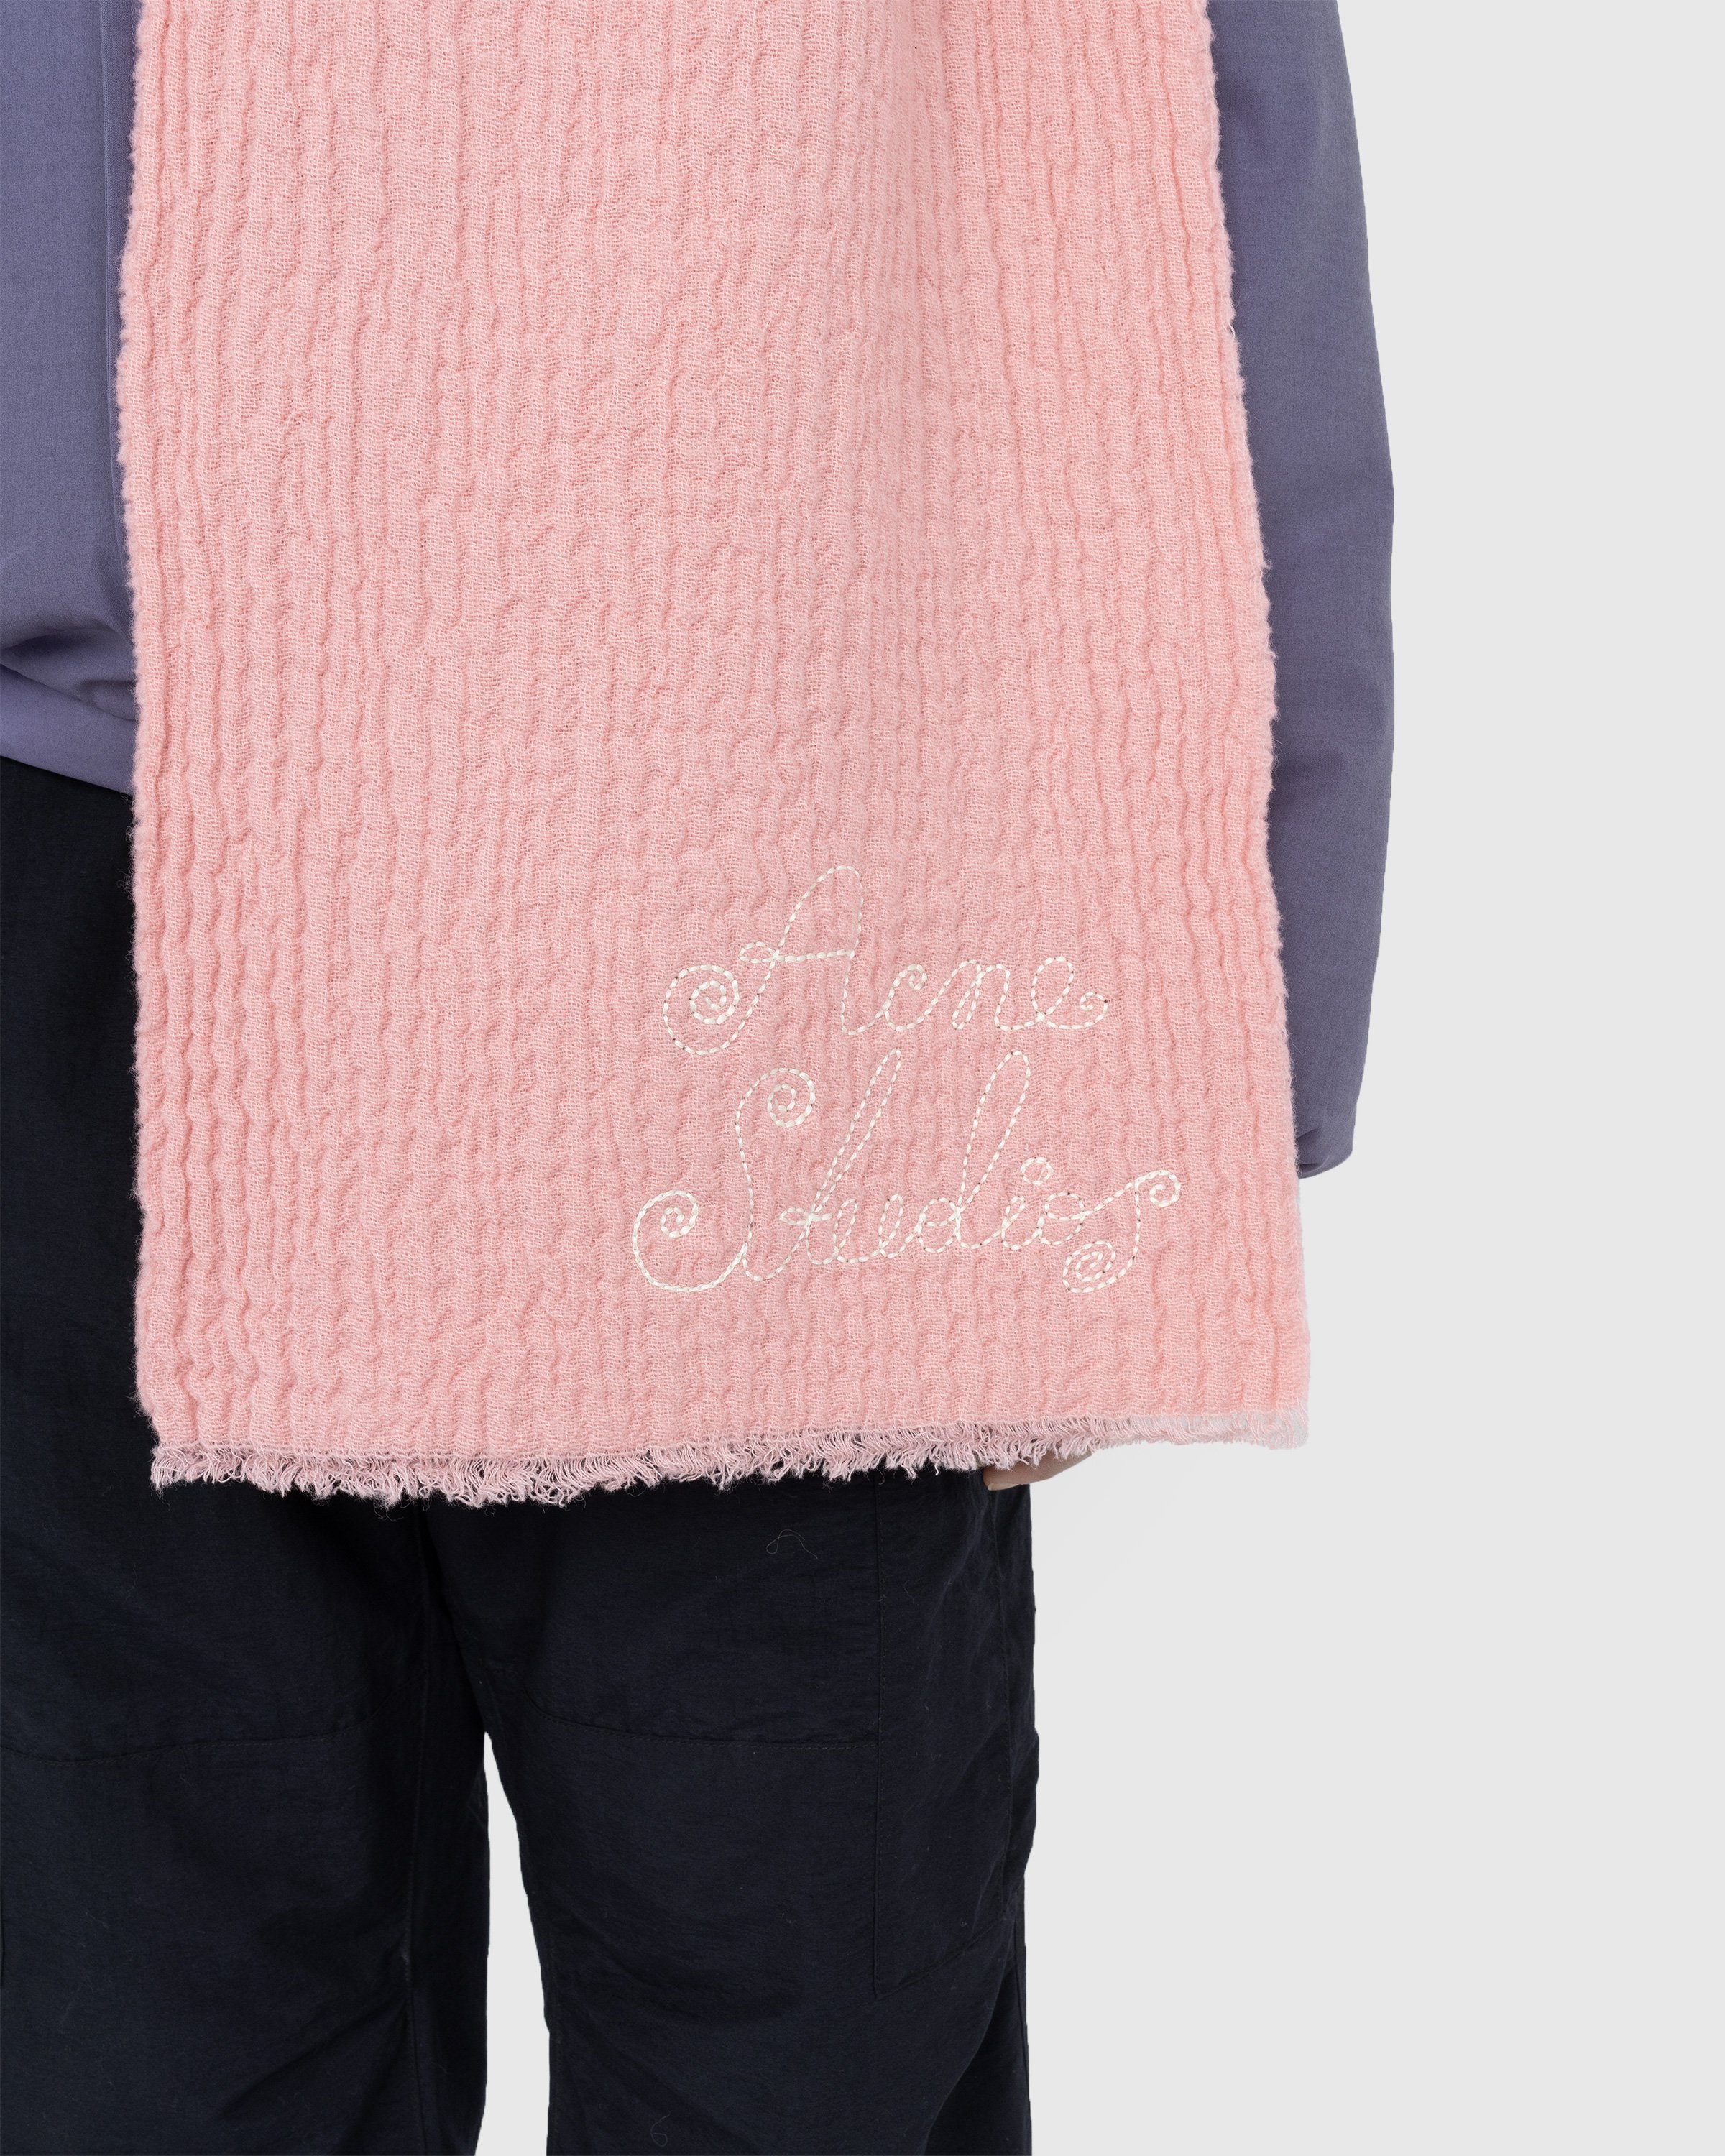 Acne Studios - Logo Scarf Pink - Accessories - Pink - Image 3